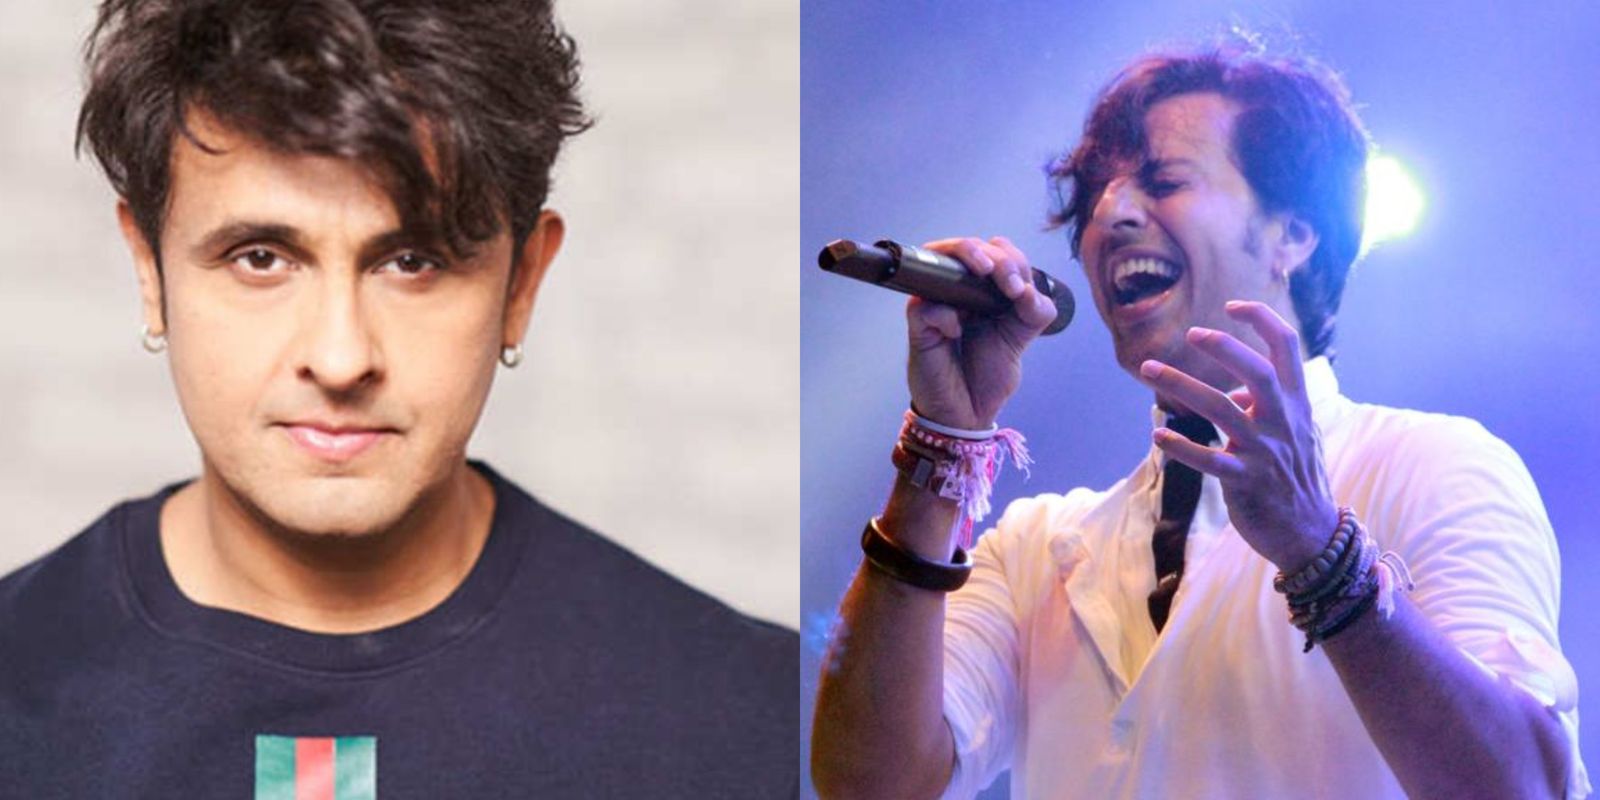 Salim Merchant Backs Sonu Nigam's Claims Against Music Labels, Says 'There's Definitely Favoritism For Certain Artistes'